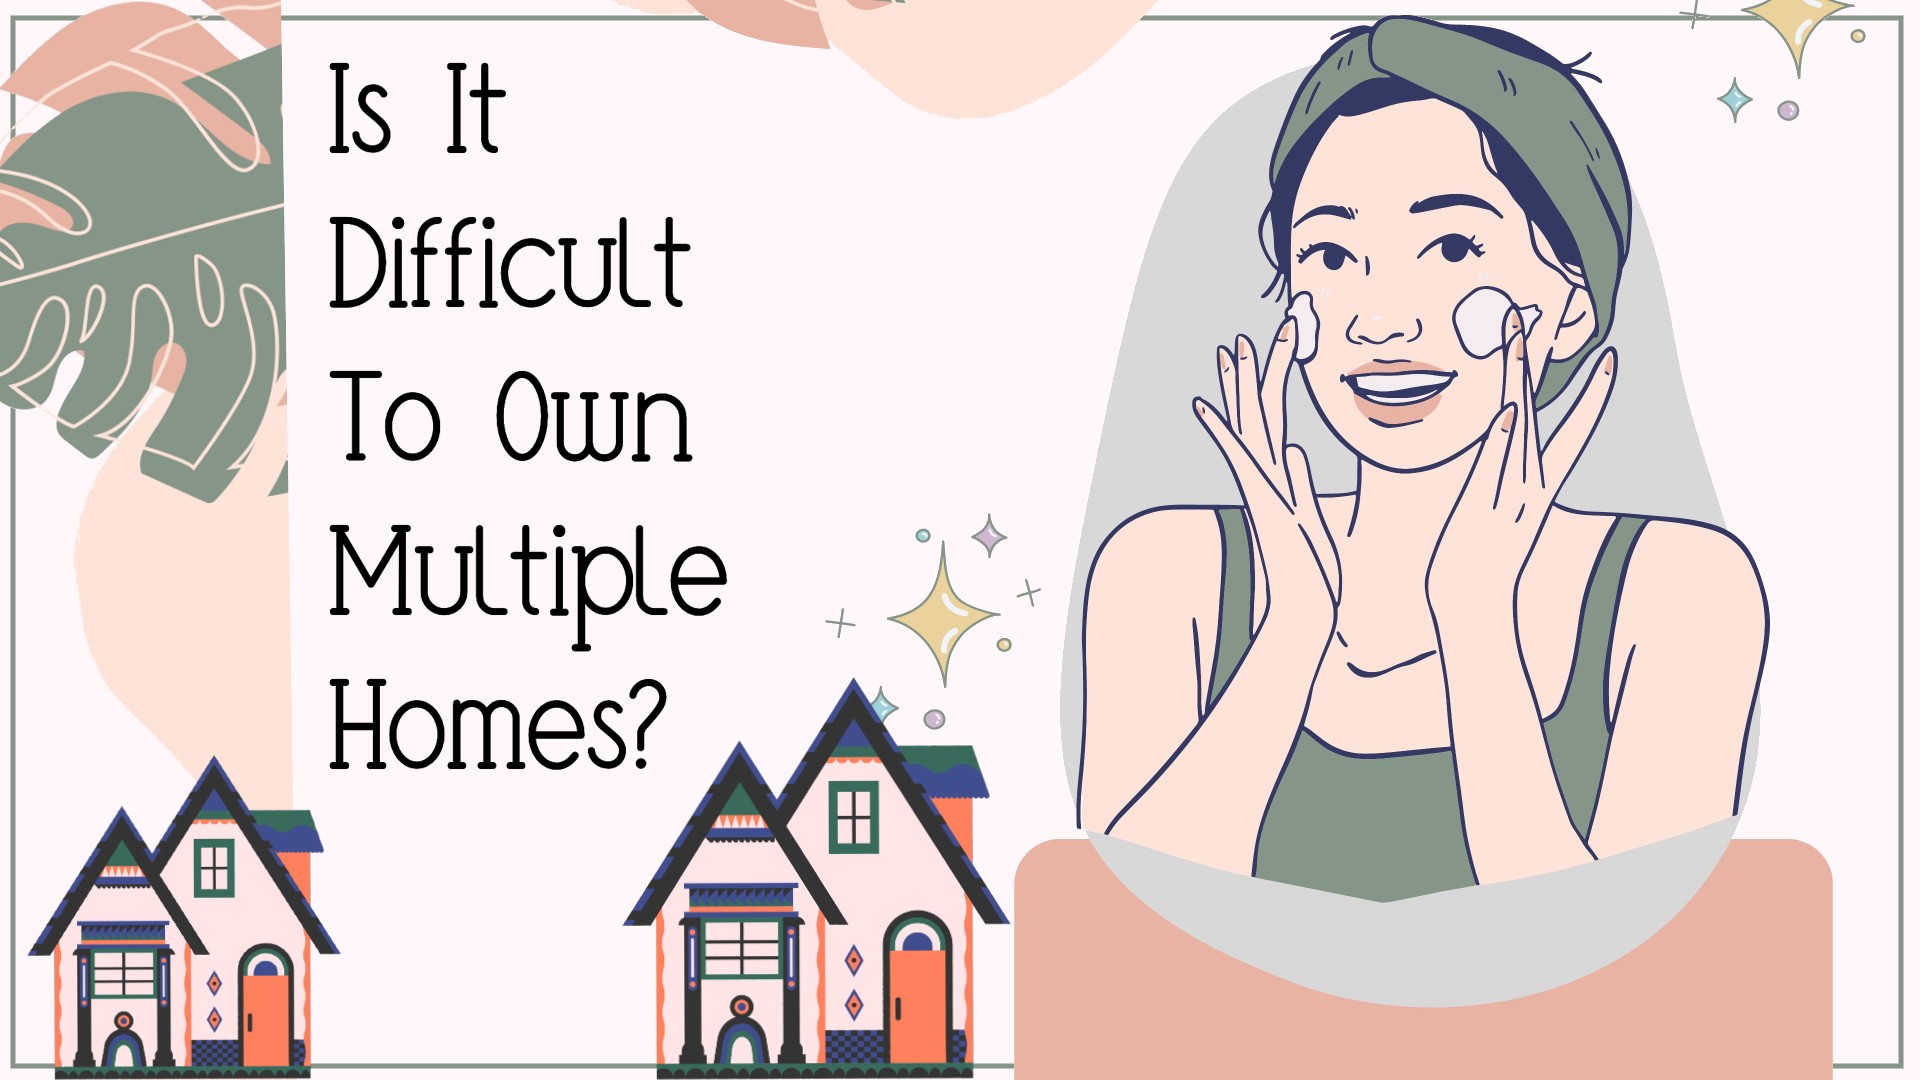 Is It Difficult to Own Multiple Houses?